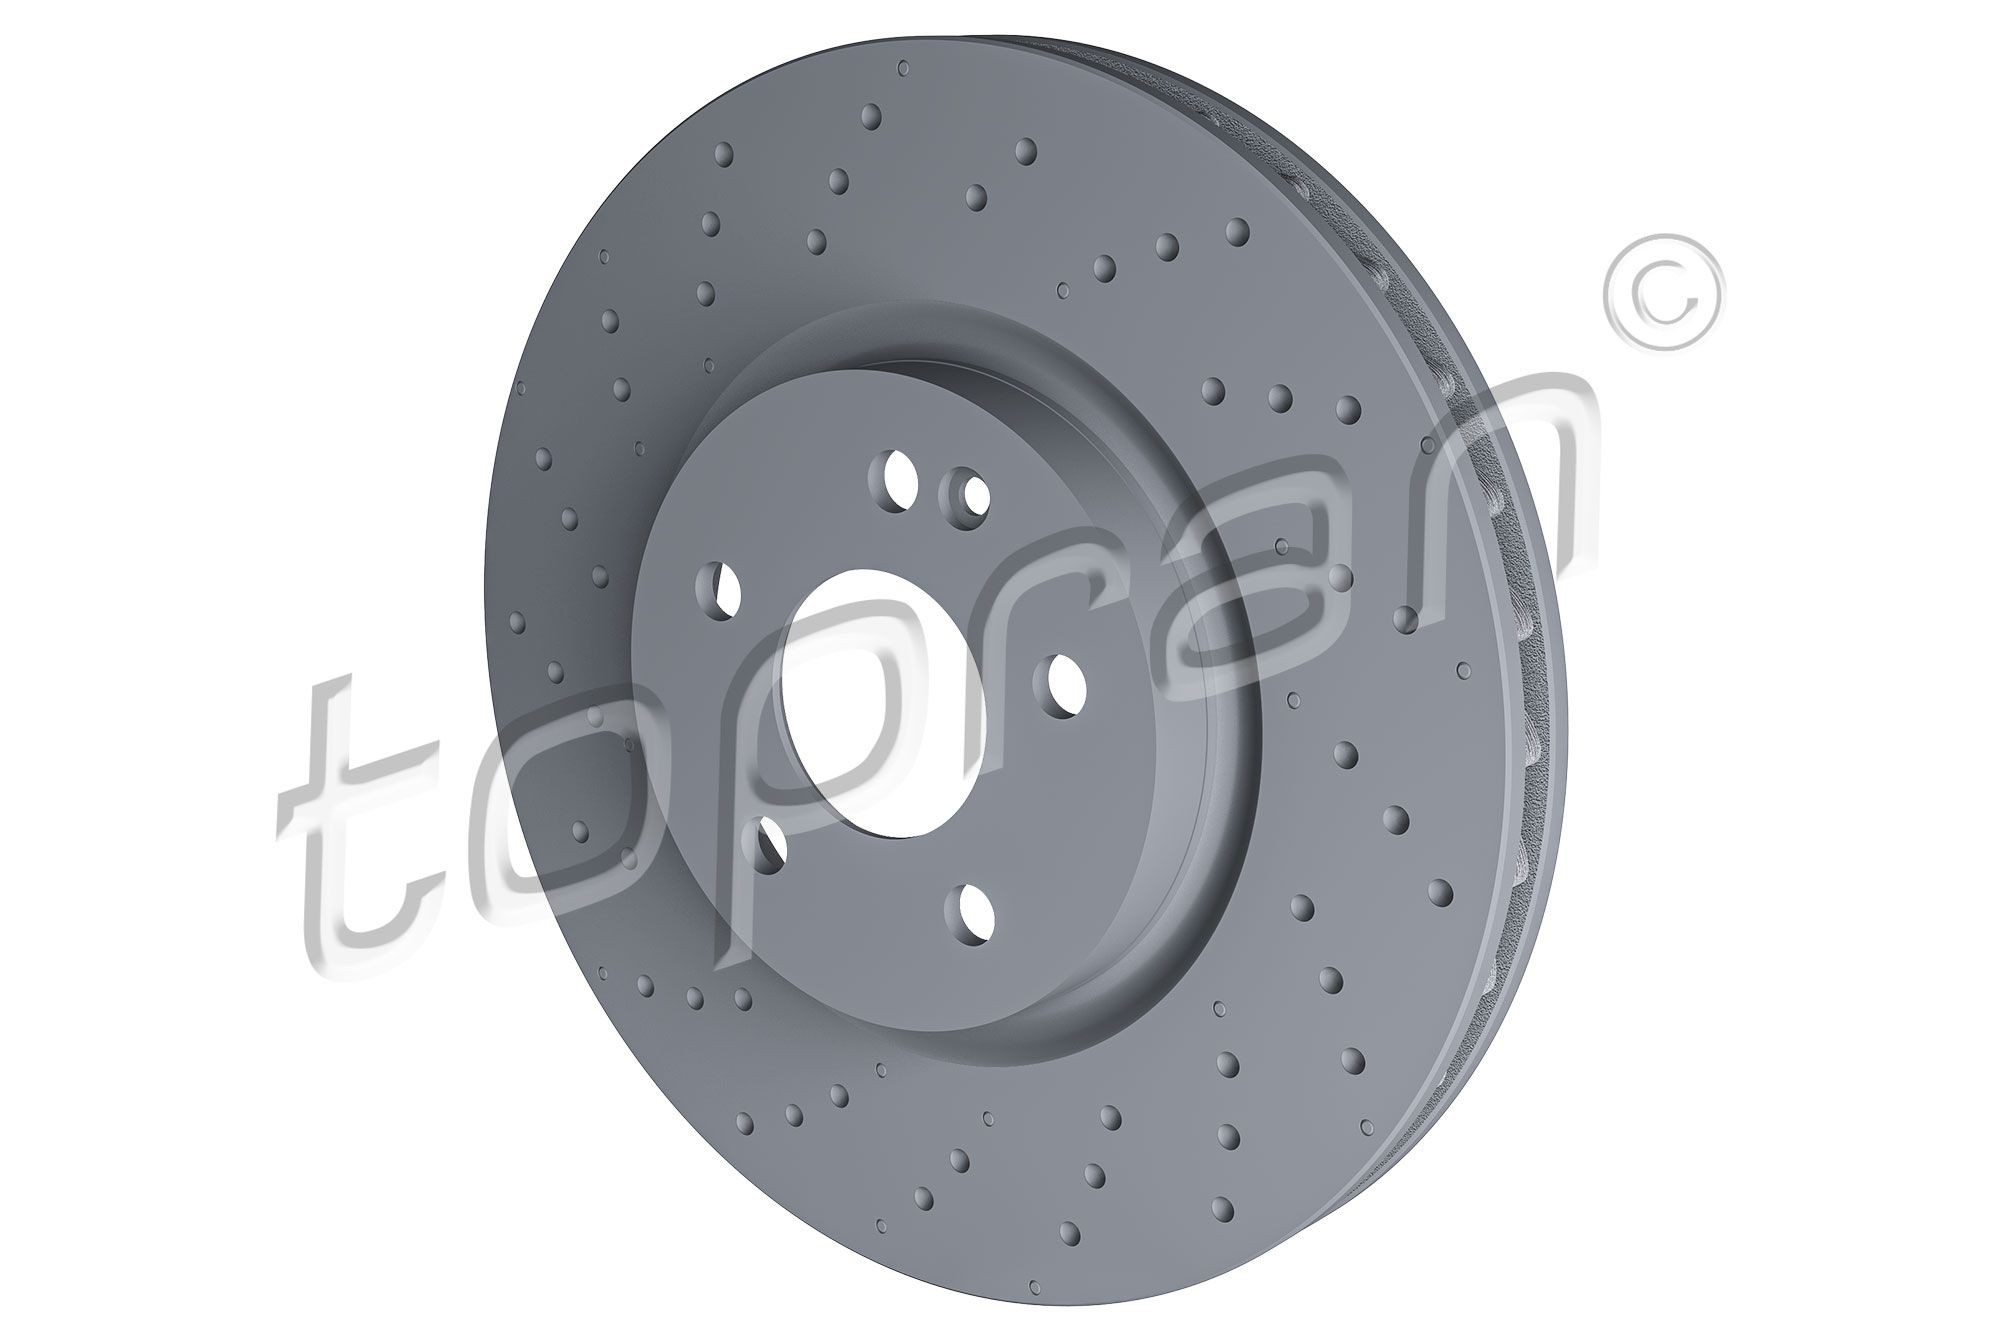 408 931 TOPRAN Brake rotors LAND ROVER Front Axle, 320x30mm, 5x112, Vented, Perforated, Coated